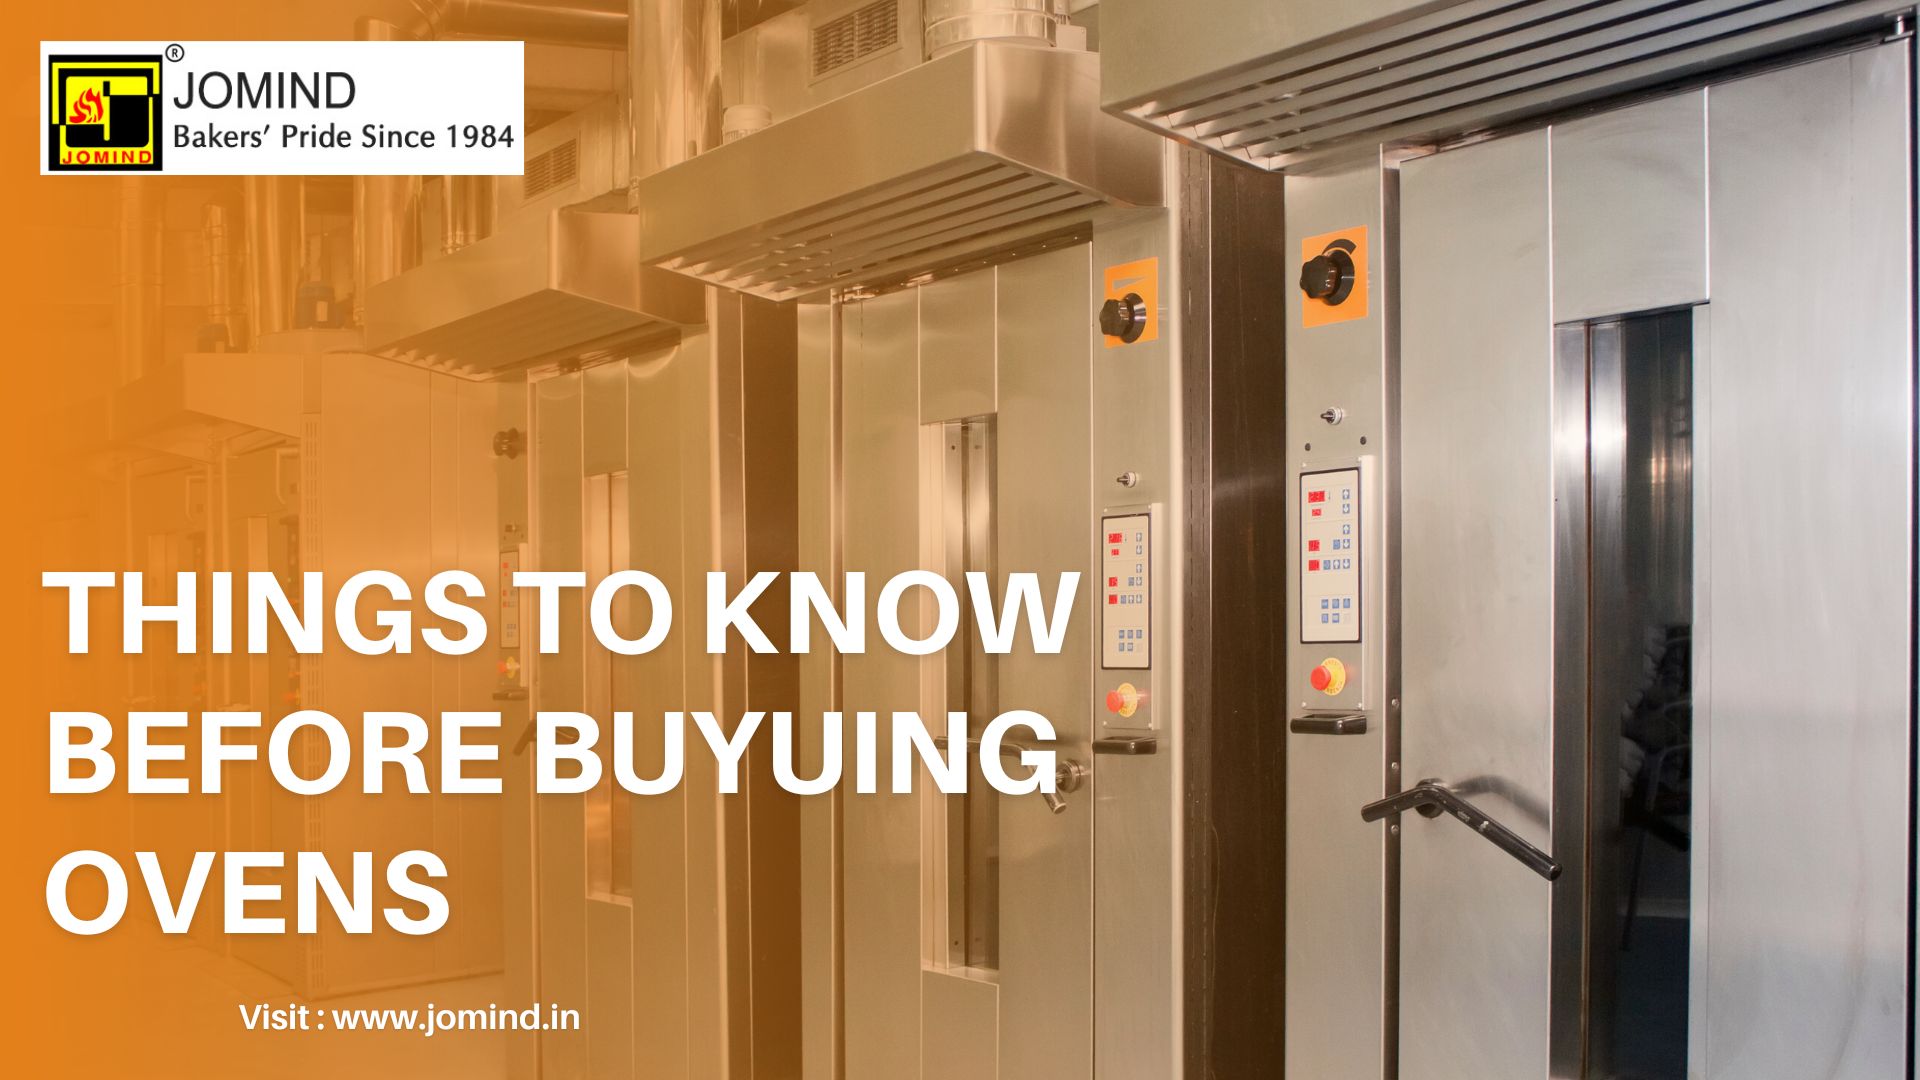 THINGS TO KNOW BEFORE BUYUING OVENS-d4f3a8ec